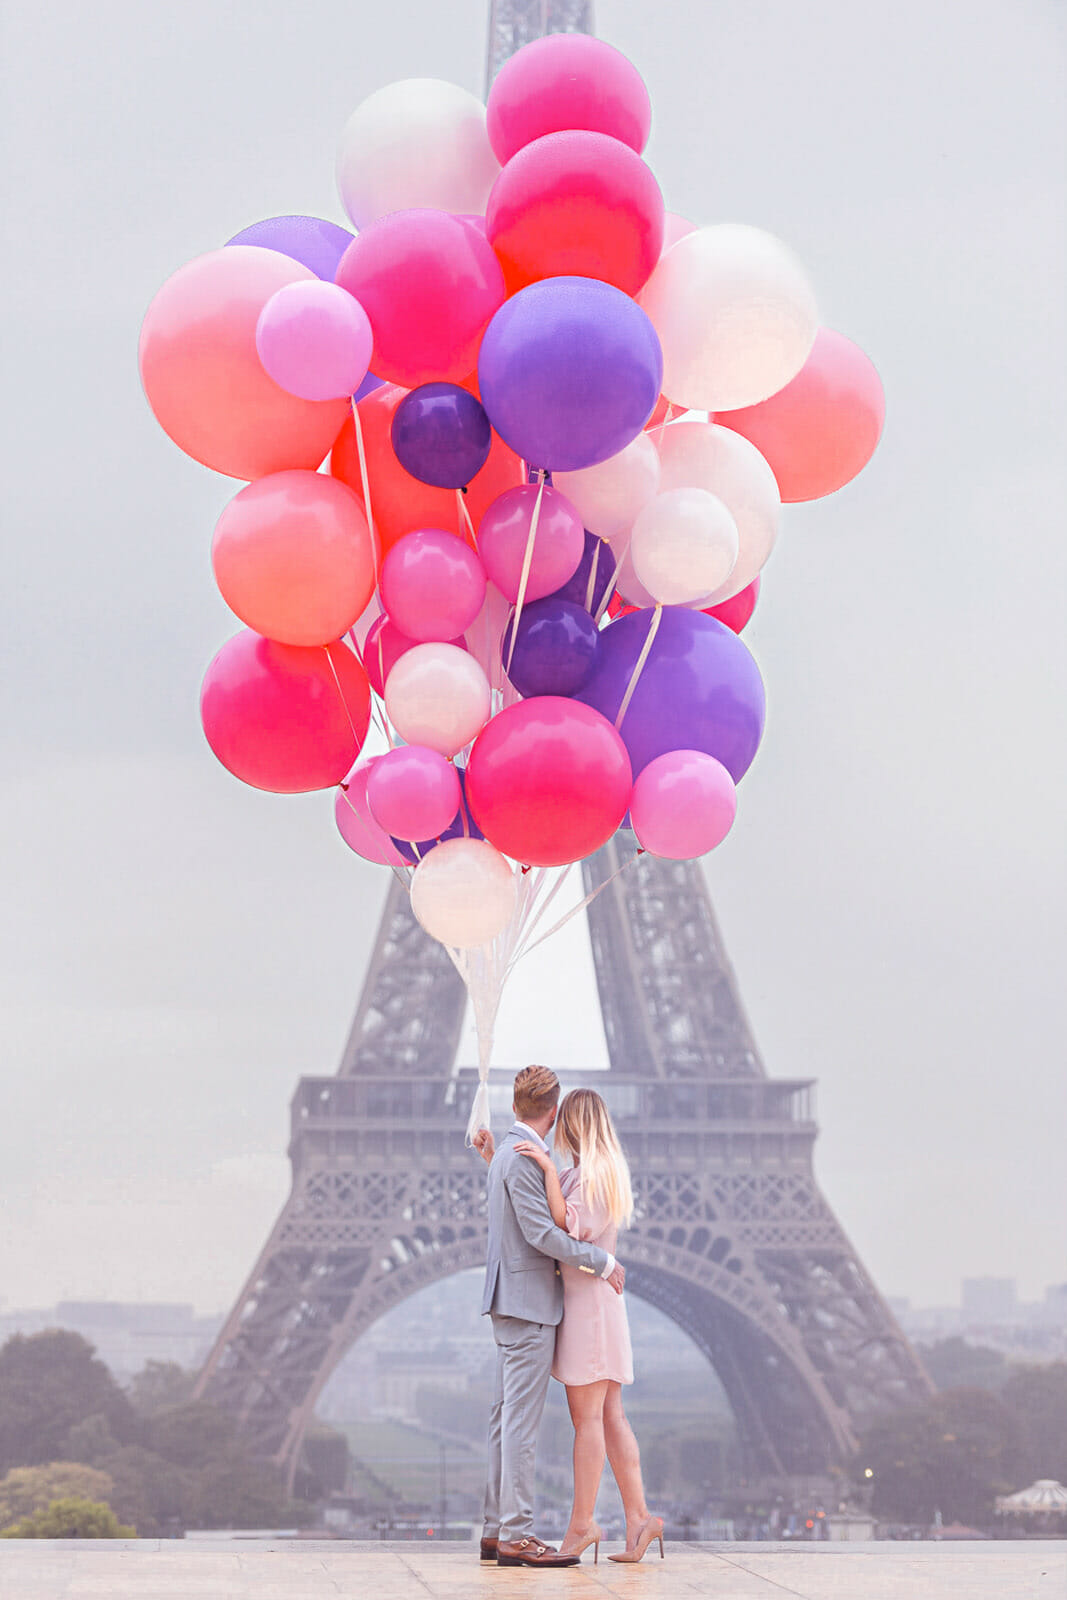 Amazing balloons as prop for Eiffel Tower couple photoshoot